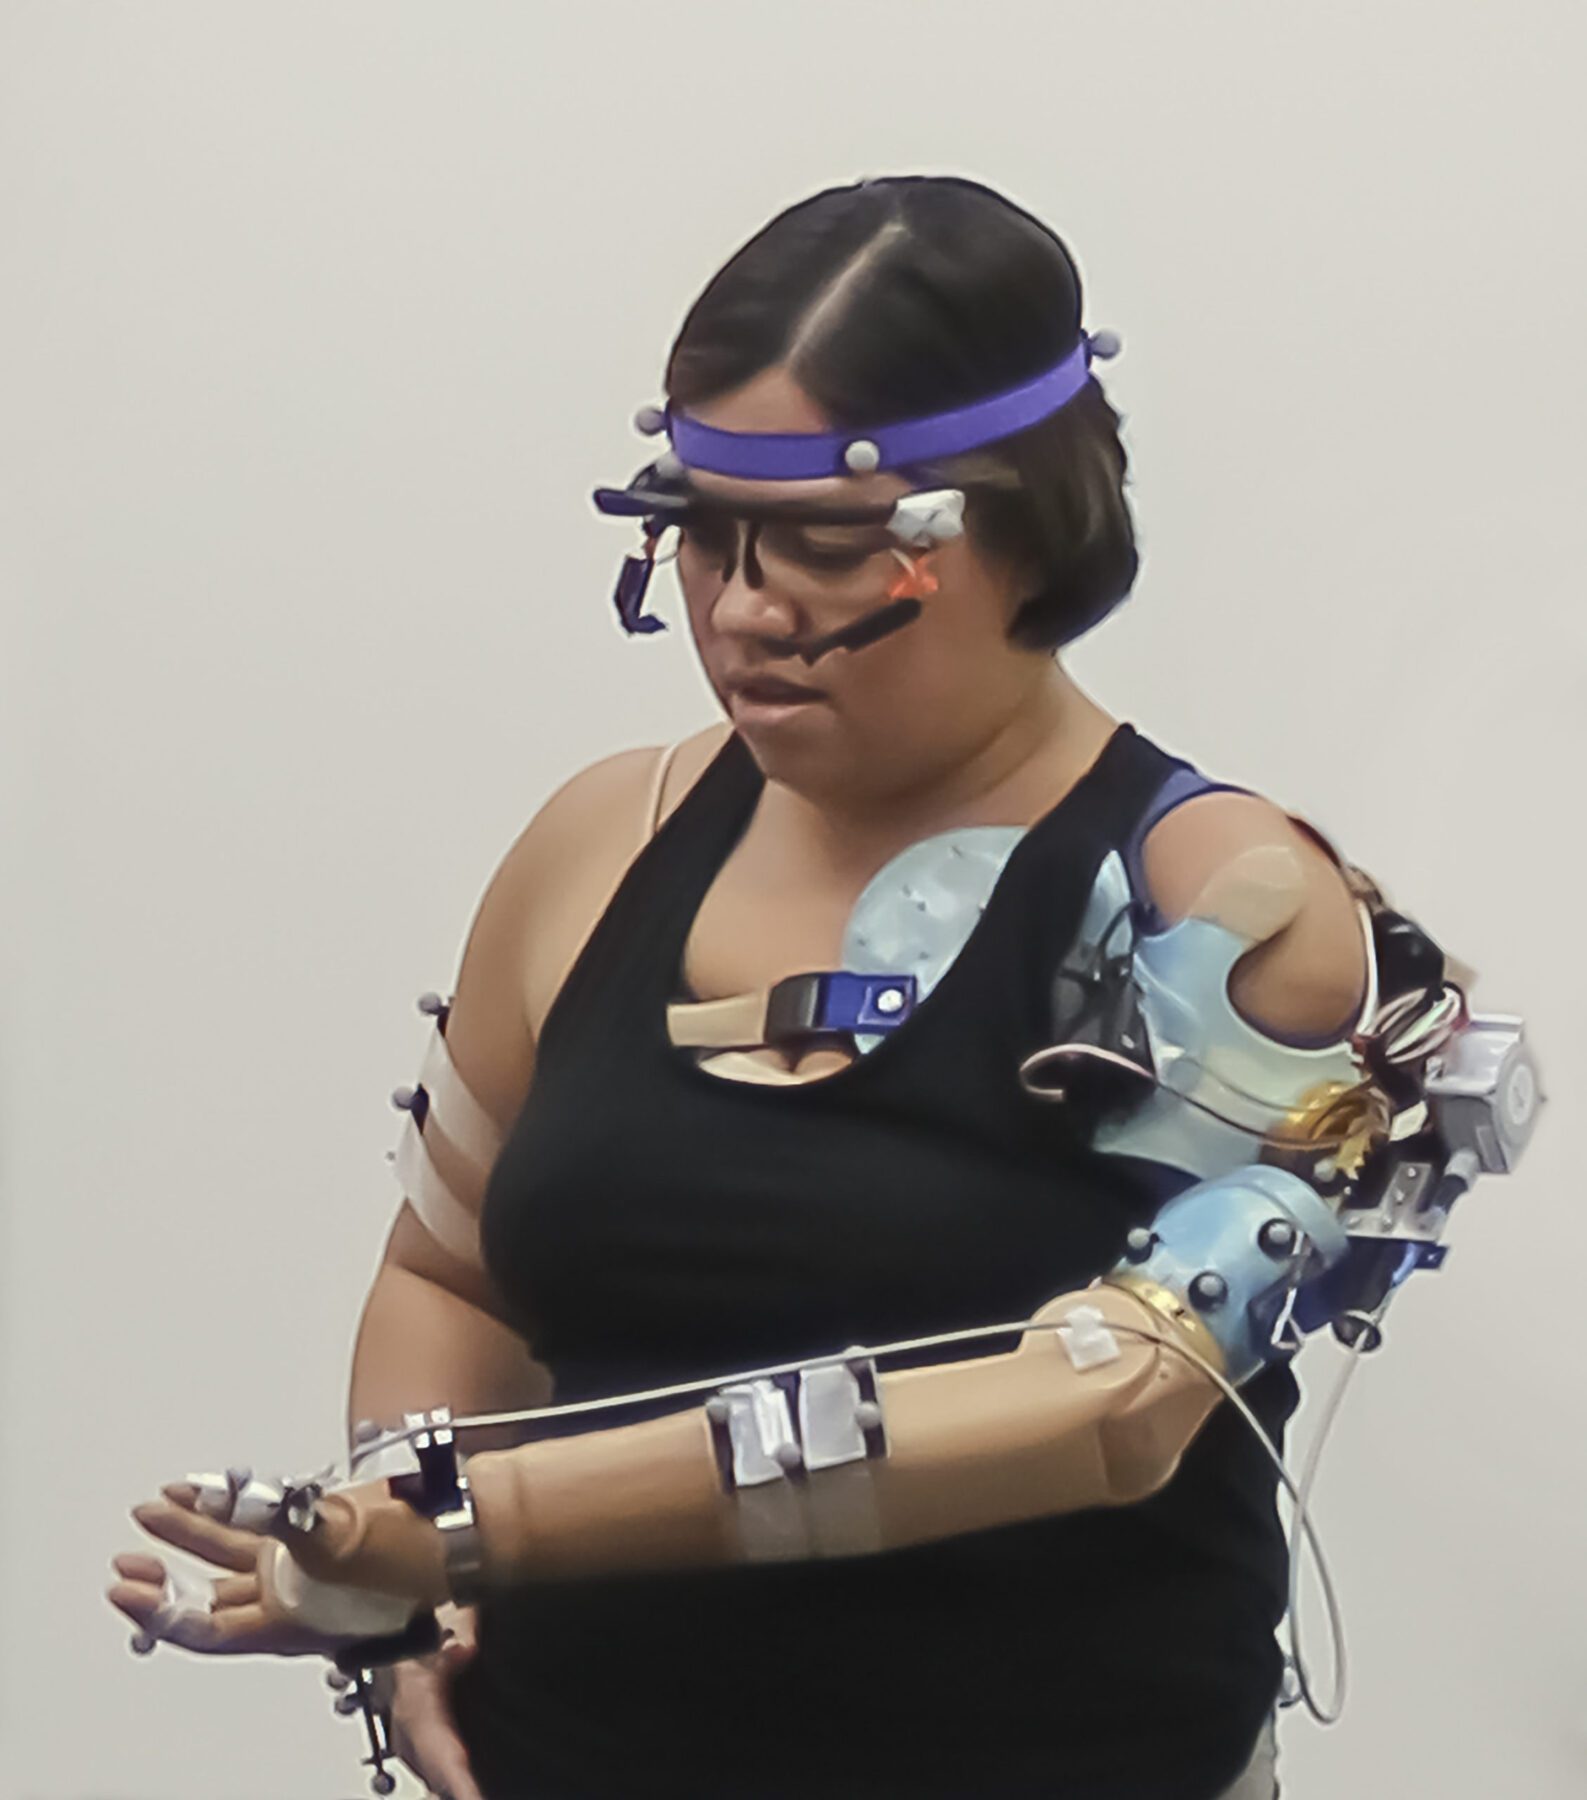 The advanced prosthetic arm feels grip movement sensation, touch on the fingertips, and is controlled intuitively by thinking. Reflective markers on users’ arms and body help a computer see their movements in a 3D-environment, while glasses allow a computer to see exactly what they see.